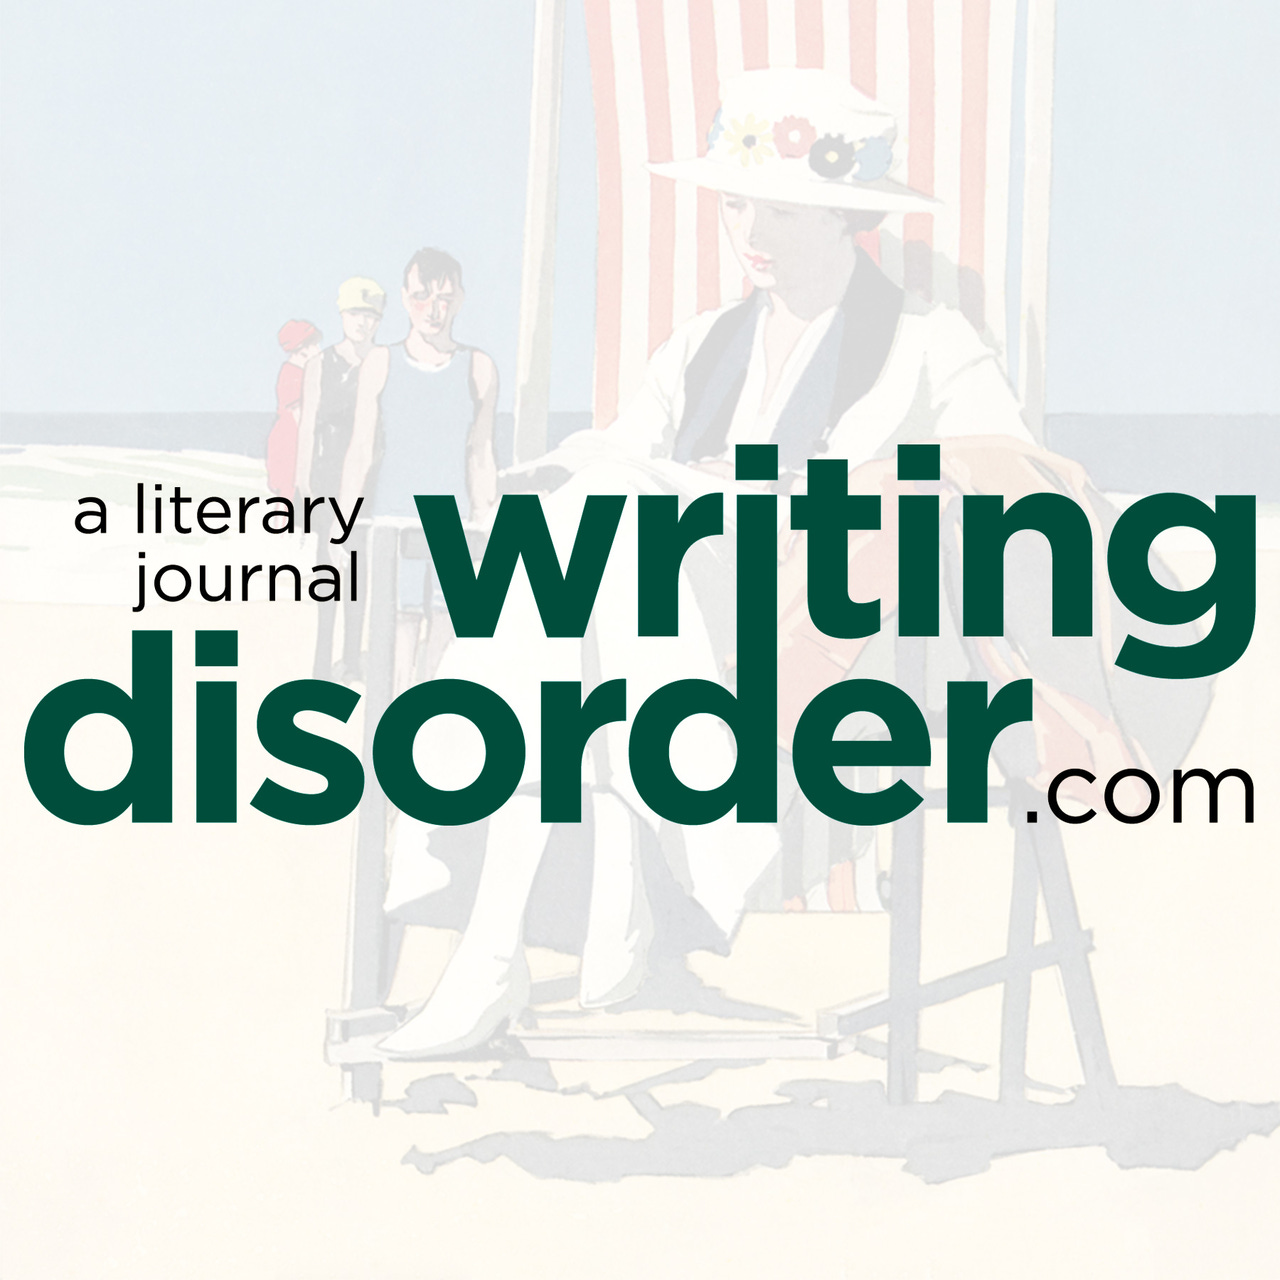 The Writing Disorder